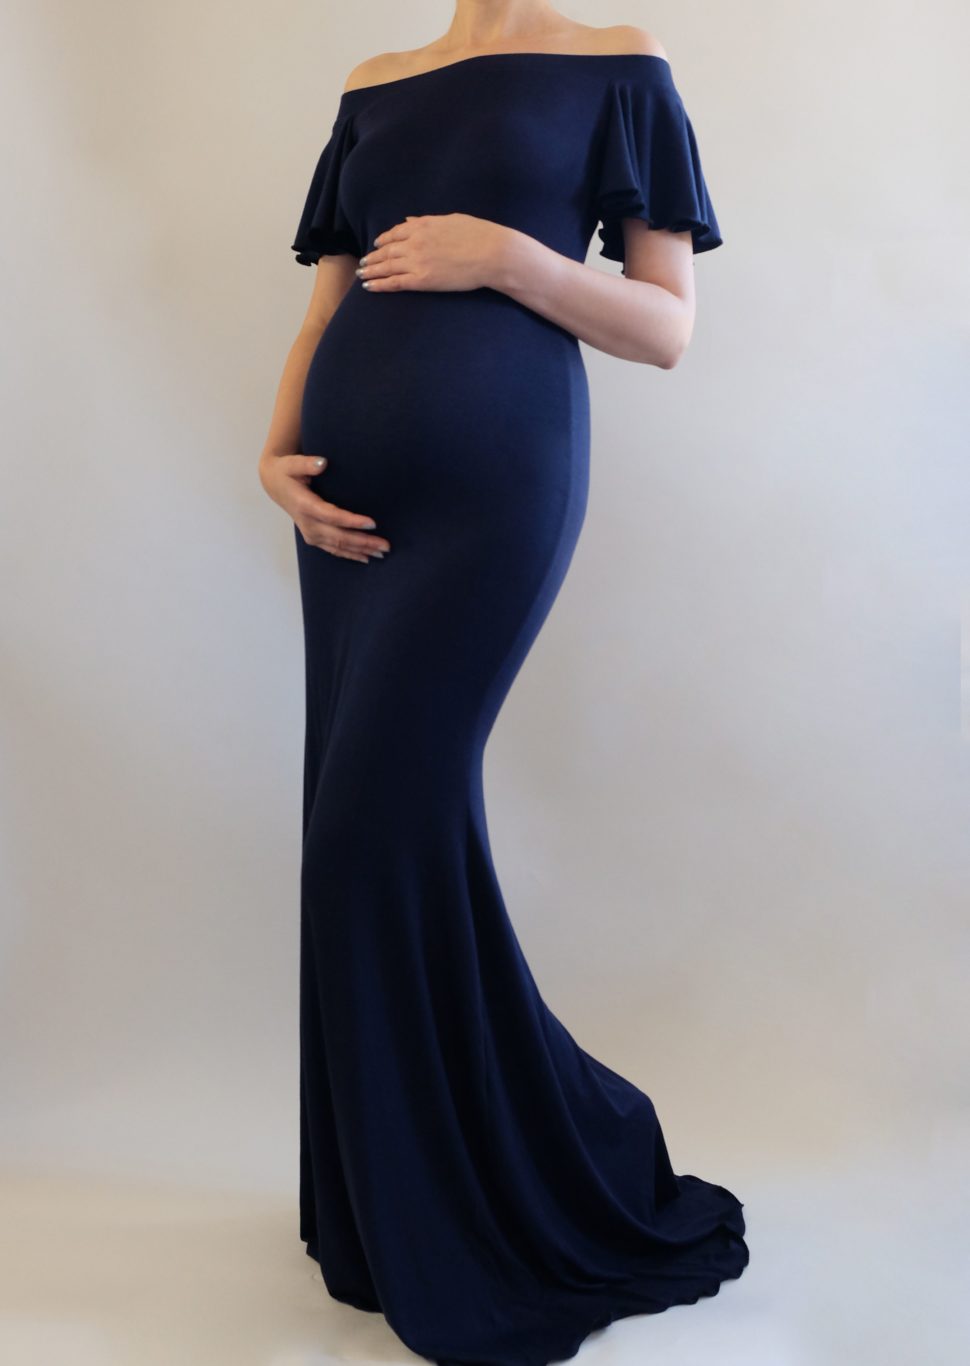 Medium Size of Baby Shower:sturdy Stylish Maternity Dresses For Baby Shower Picture Ideas Stylish Maternity Dresses For Baby Shower Iris Baby Shower Dress Fitted Maternity Dress Maternity Gown Baby